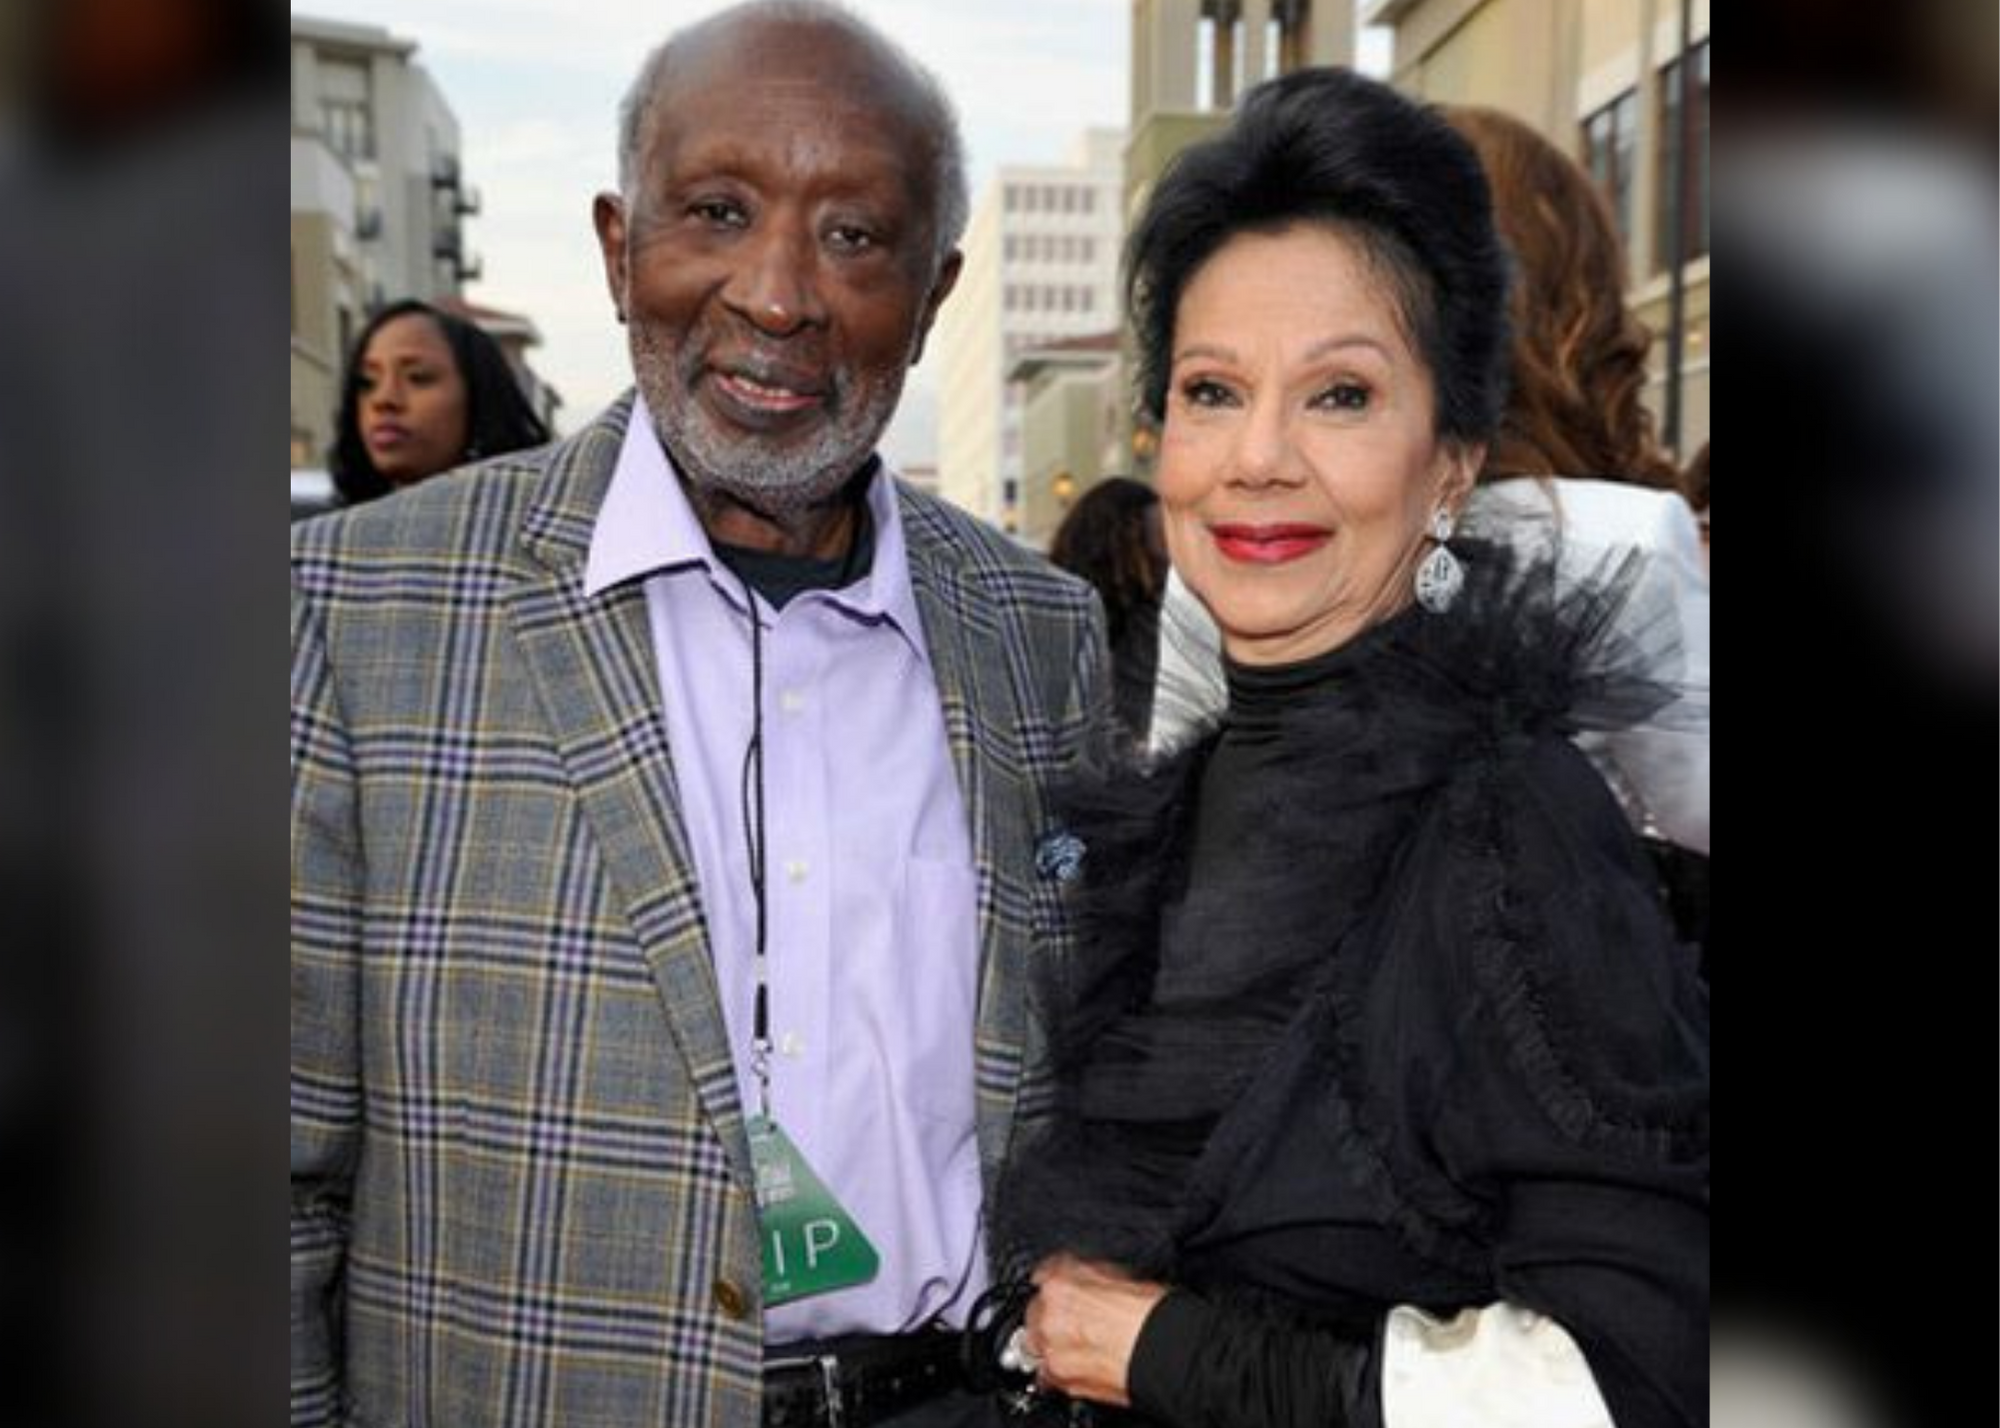 Jacqueline Avant, Wife of Music Legend Clarence Avant, Fatally Shot In Home Invasion